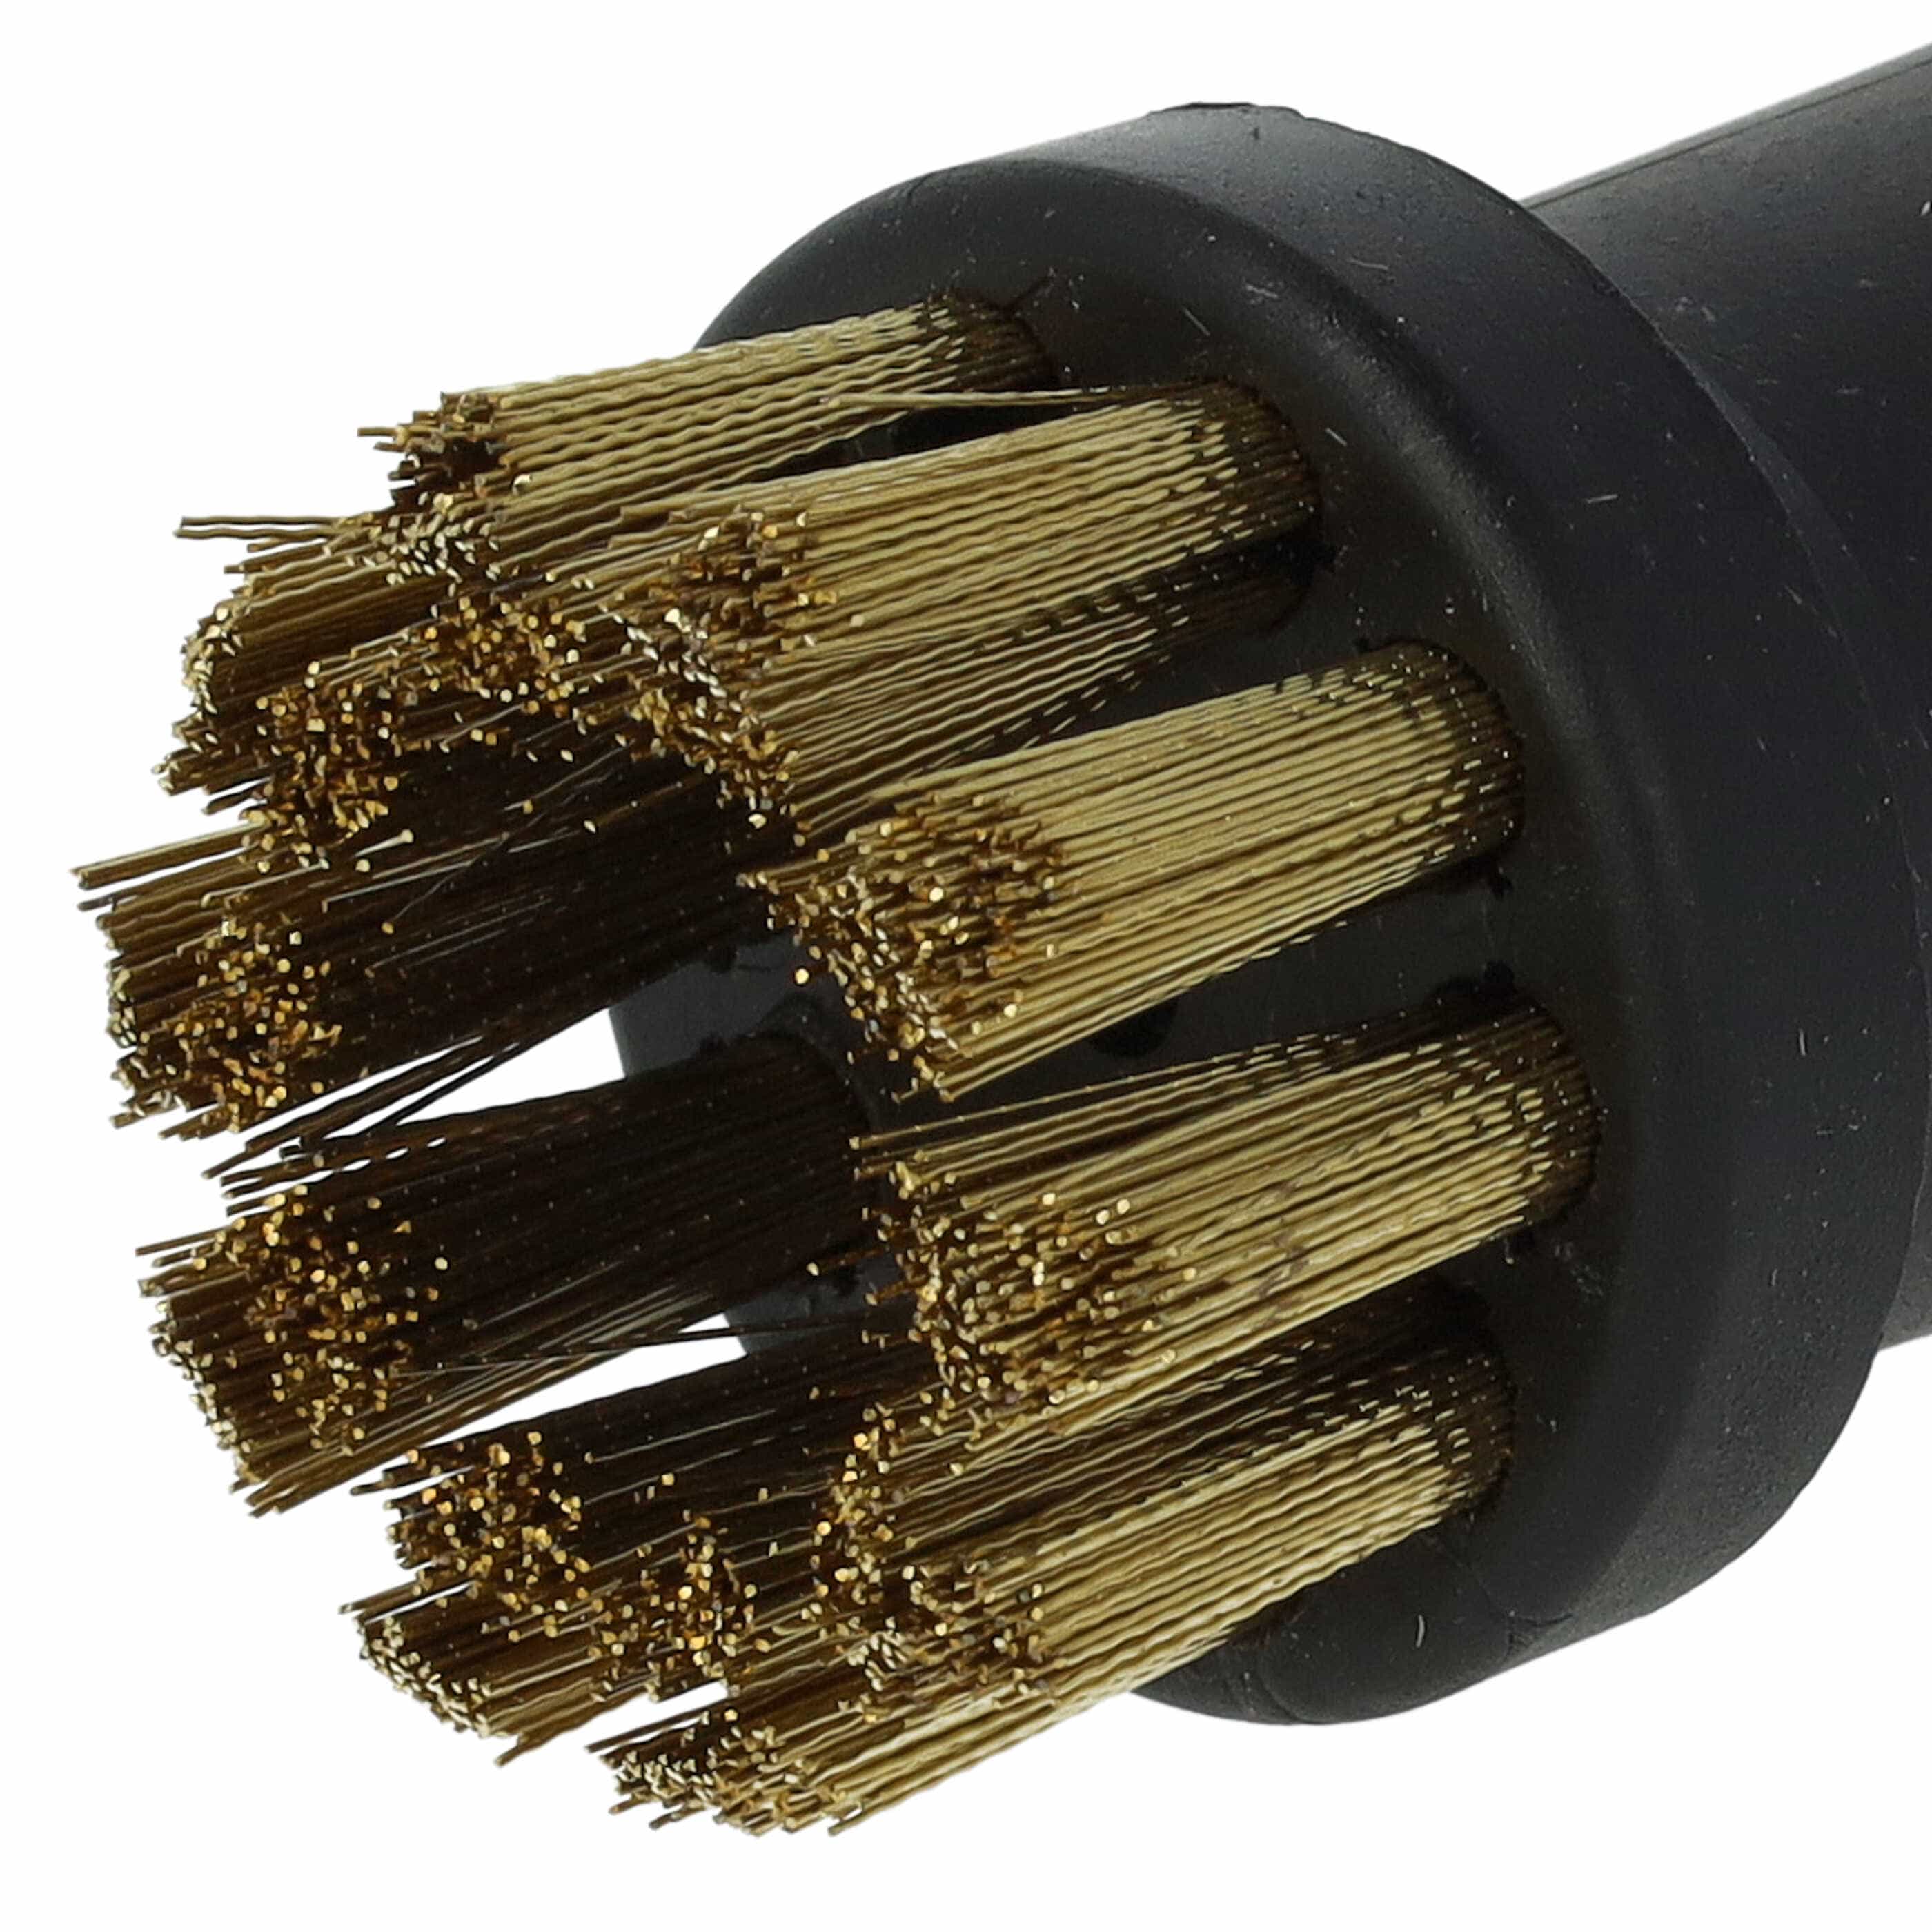 3x Round Brush as Replacement for Kärcher 2.863-075.0, 2.863-061.0 for Kärcher Steam Cleaner